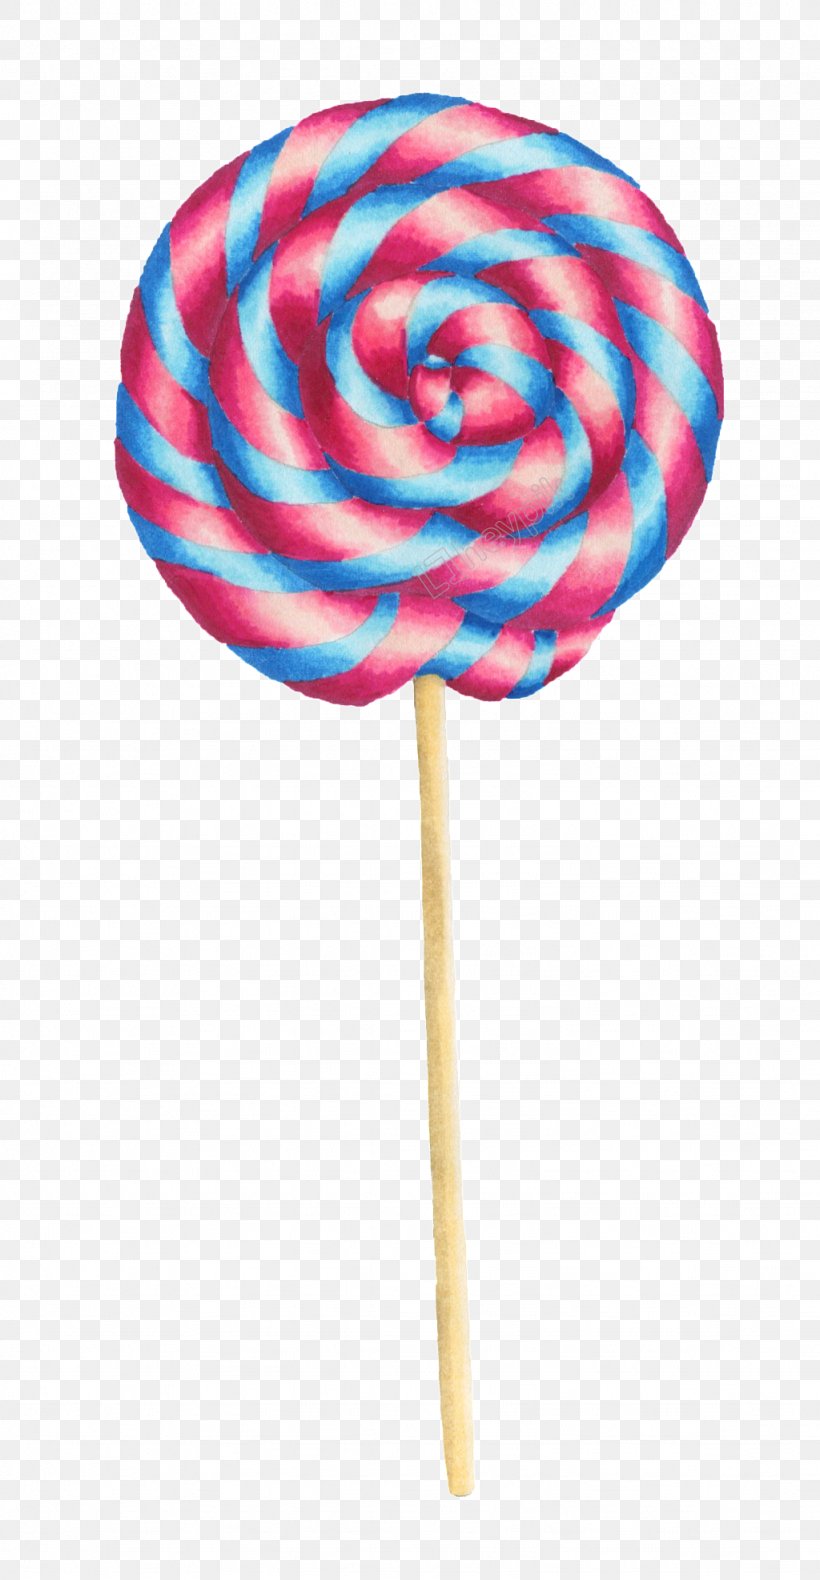 Lollipop Stick Candy Confectionery Candy Hard Candy, PNG, 1024x1974px, Lollipop, Candy, Confectionery, Food, Hard Candy Download Free